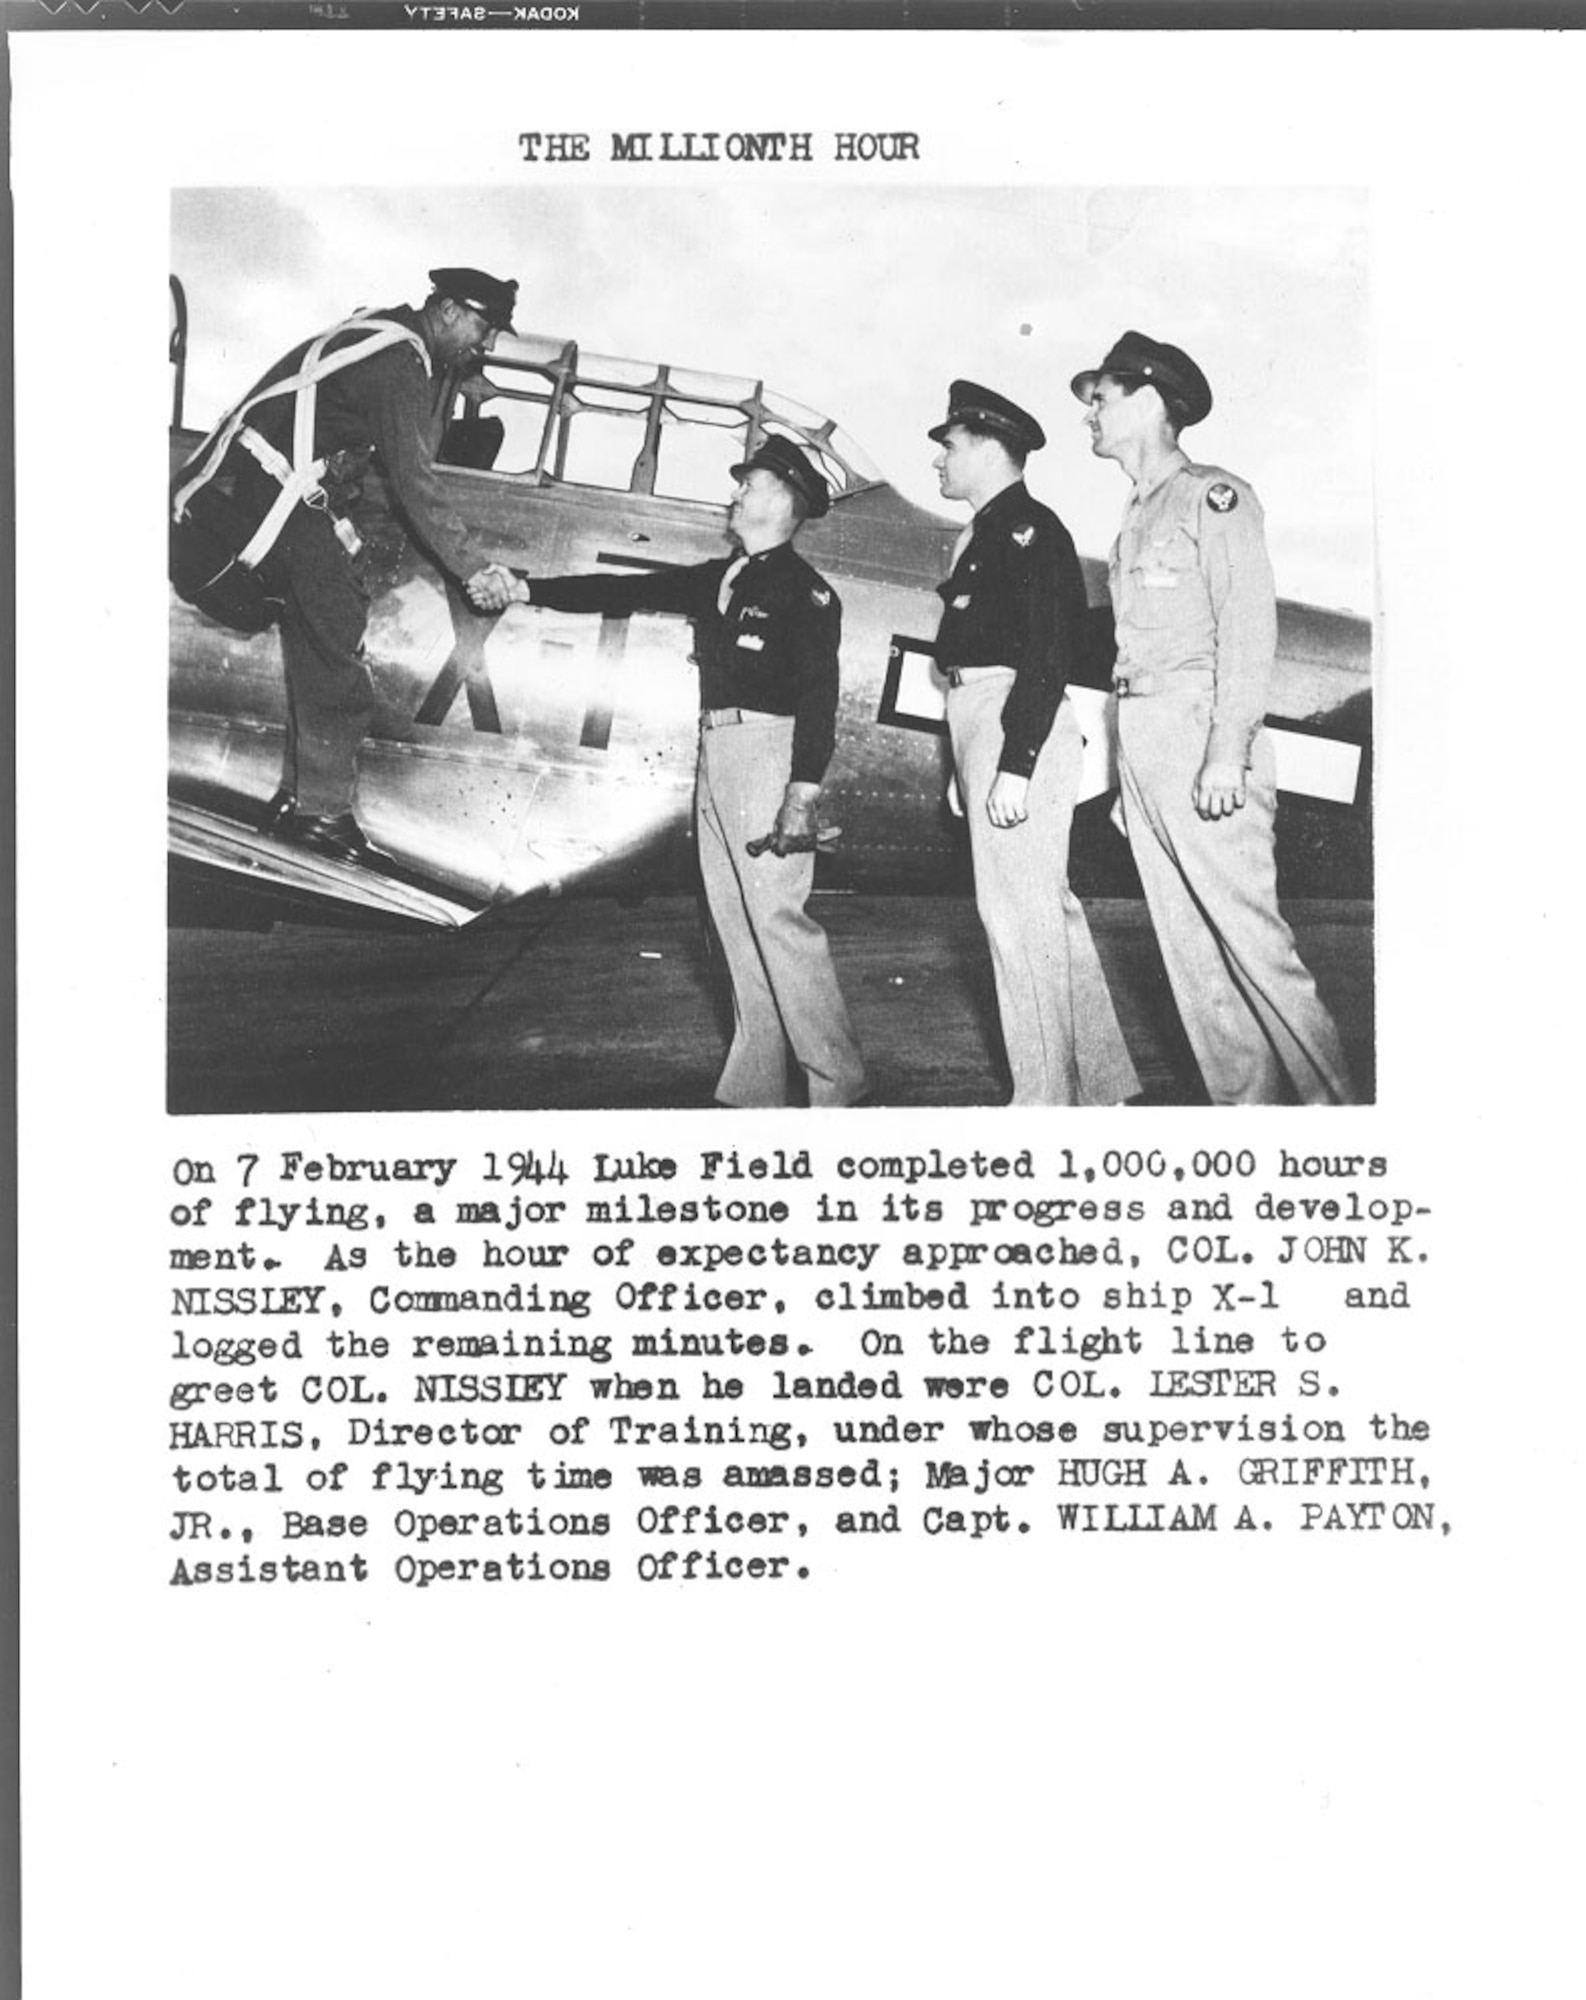 On 7 February 1944 Luke Field completed 1,000,000 hours of flying, a milestone in its progress and development. As the hour of expectancy approached, Col. John C. Nissley, commanding officer, climbed into ship X-1 and logged the remaining minutes. On the flightline to greet Col. Nissley were Col. Lester S. Harris, Director of Training, under whose supervision the total flying time was ammased; Major Hugh A. Griffith, Jr., Base Operations Officer, and Capt. William A. Payton, Assistant Operations Officer.